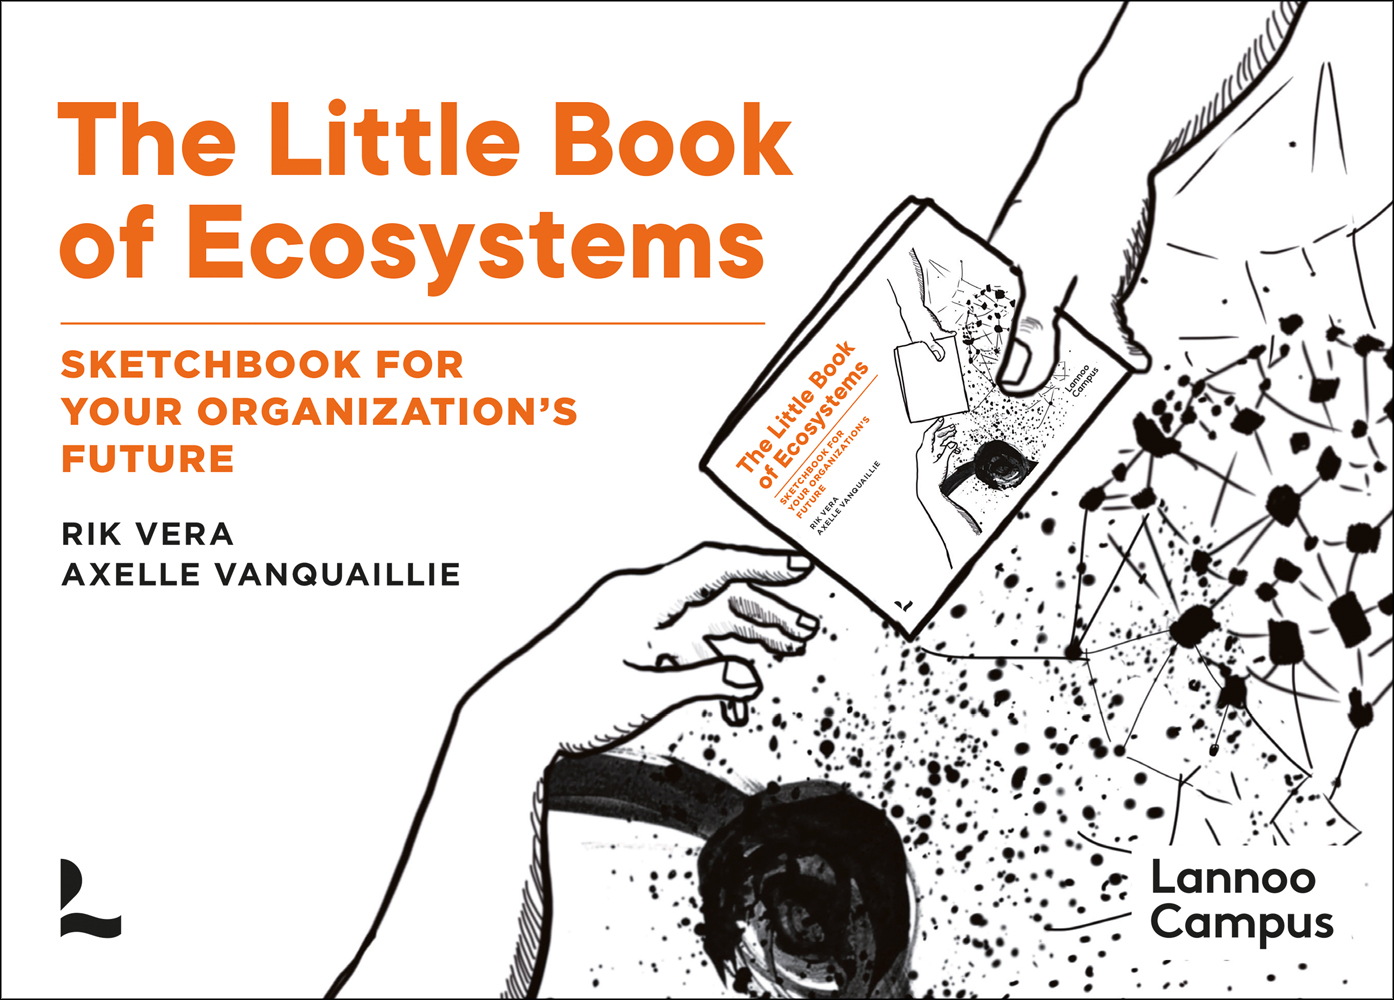 The Little Book of Ecosystems